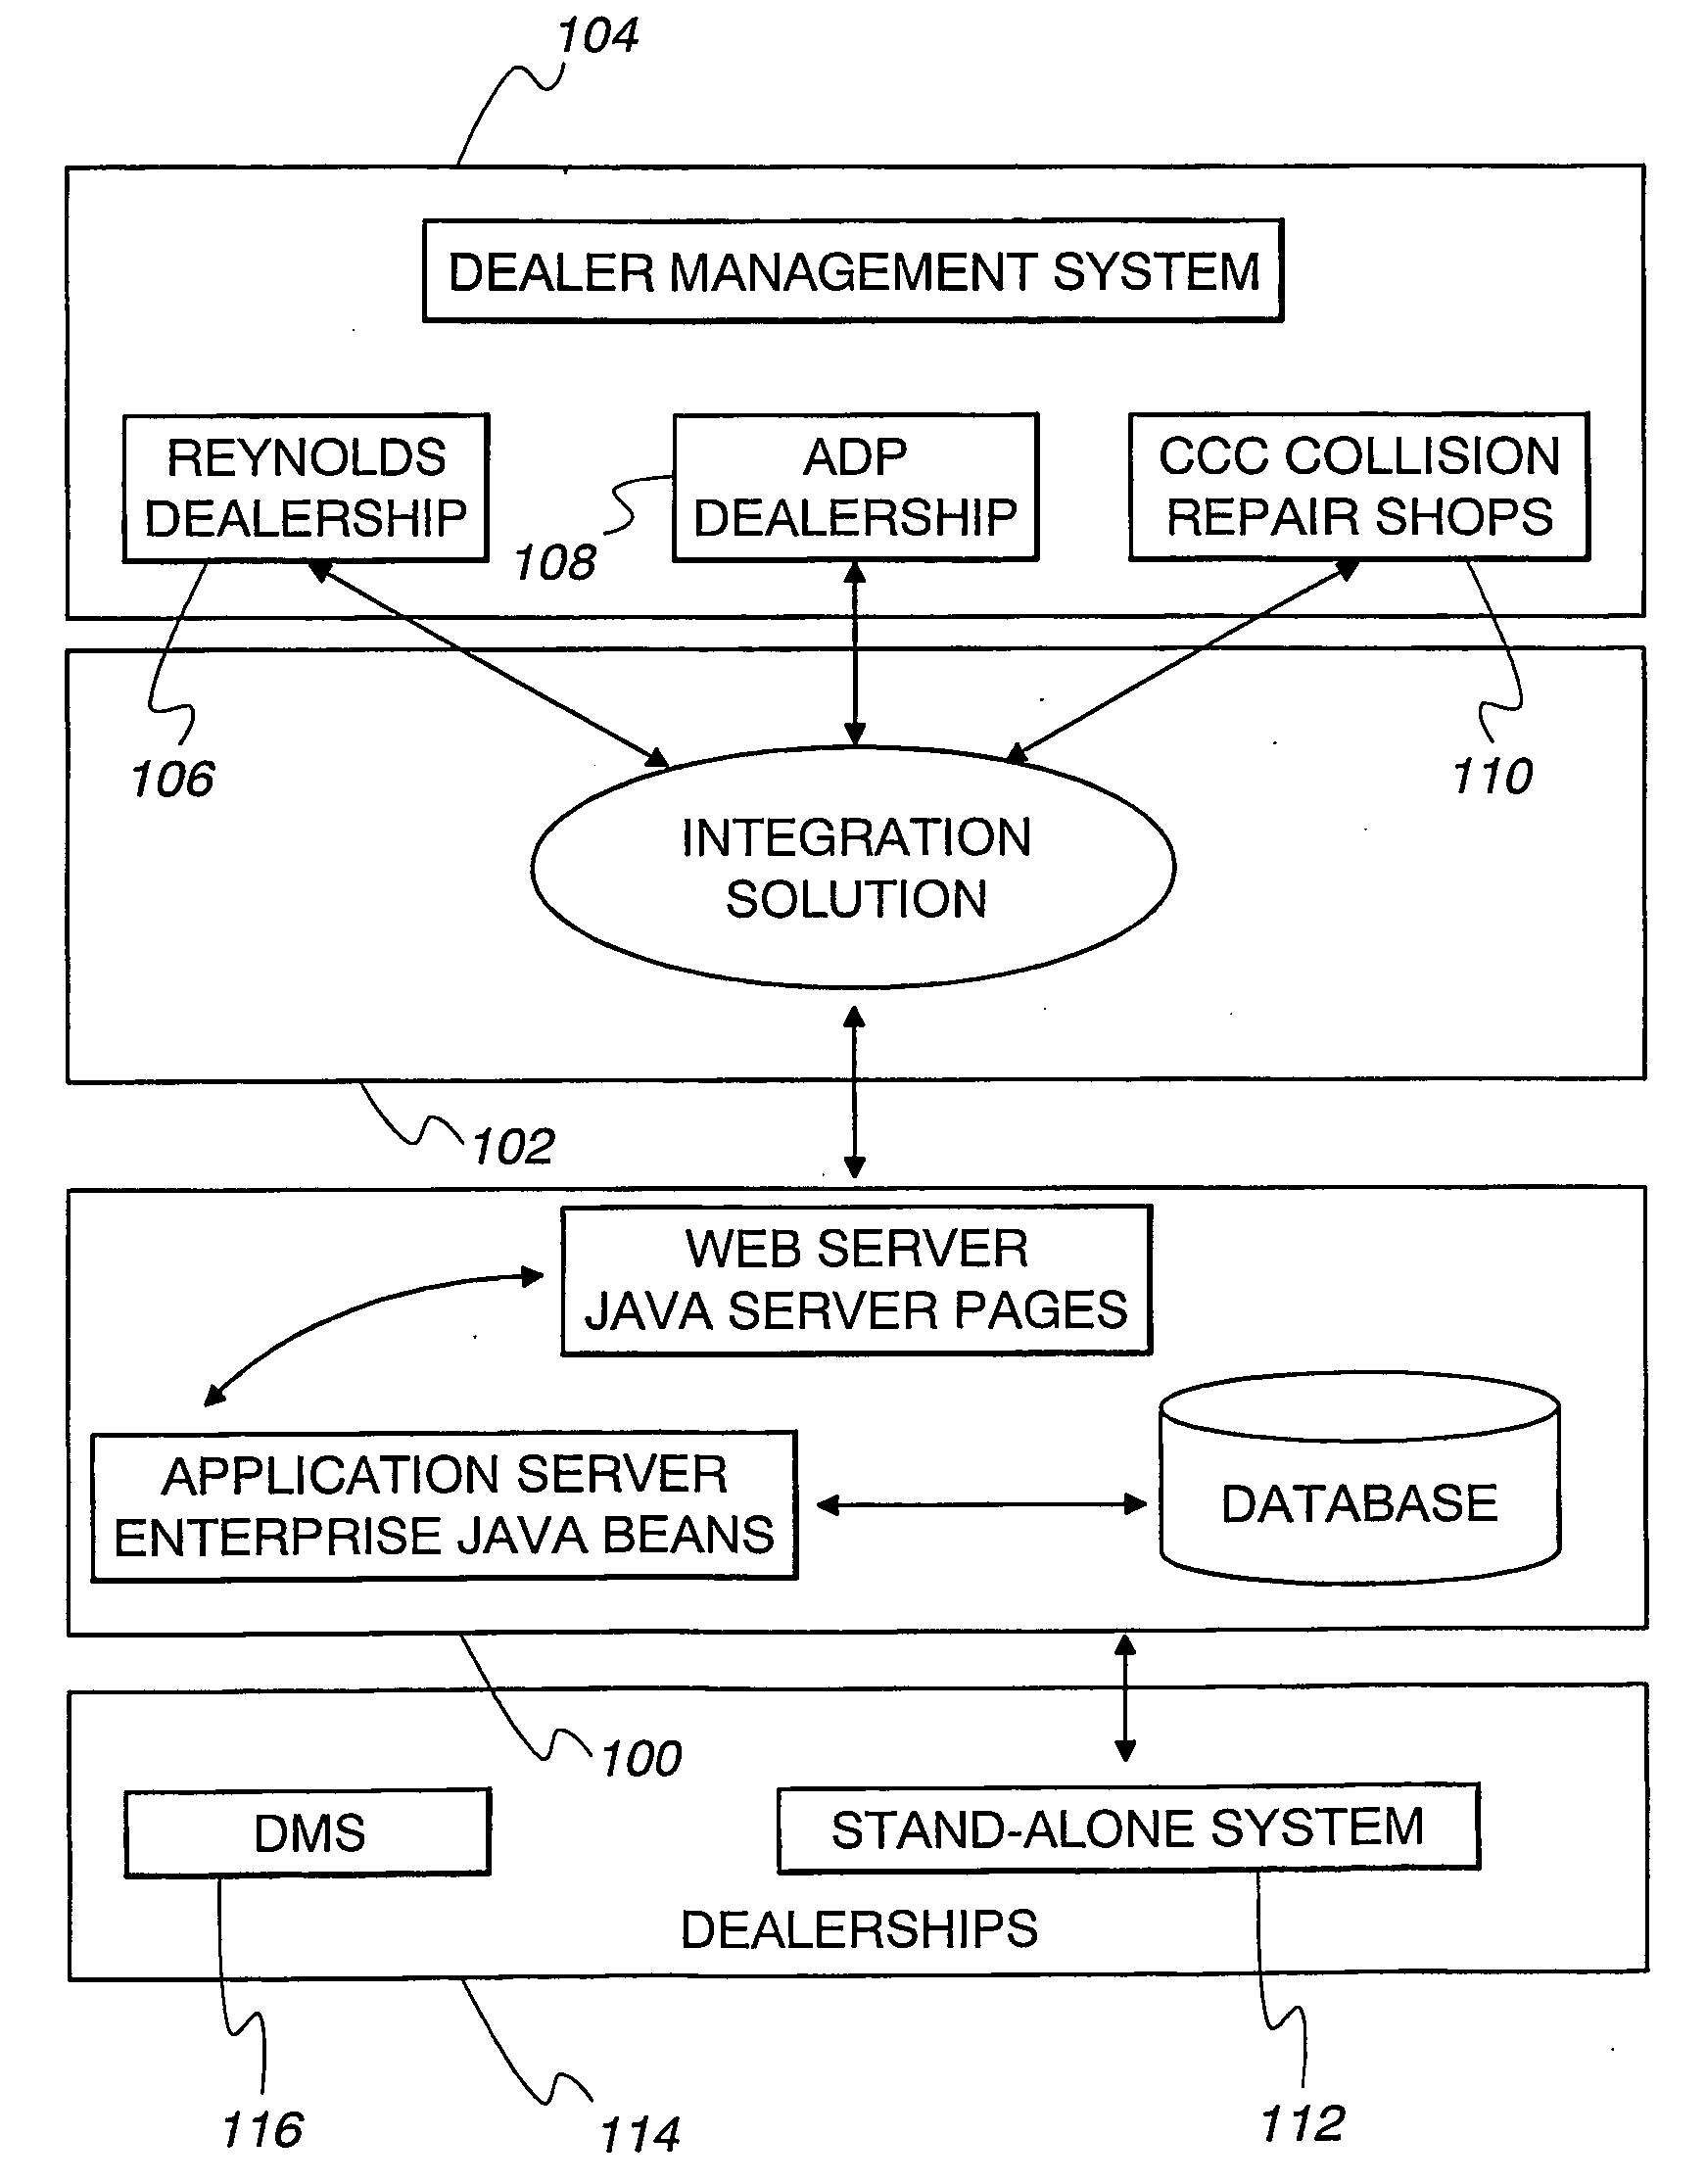 On-line parts location and transaction system